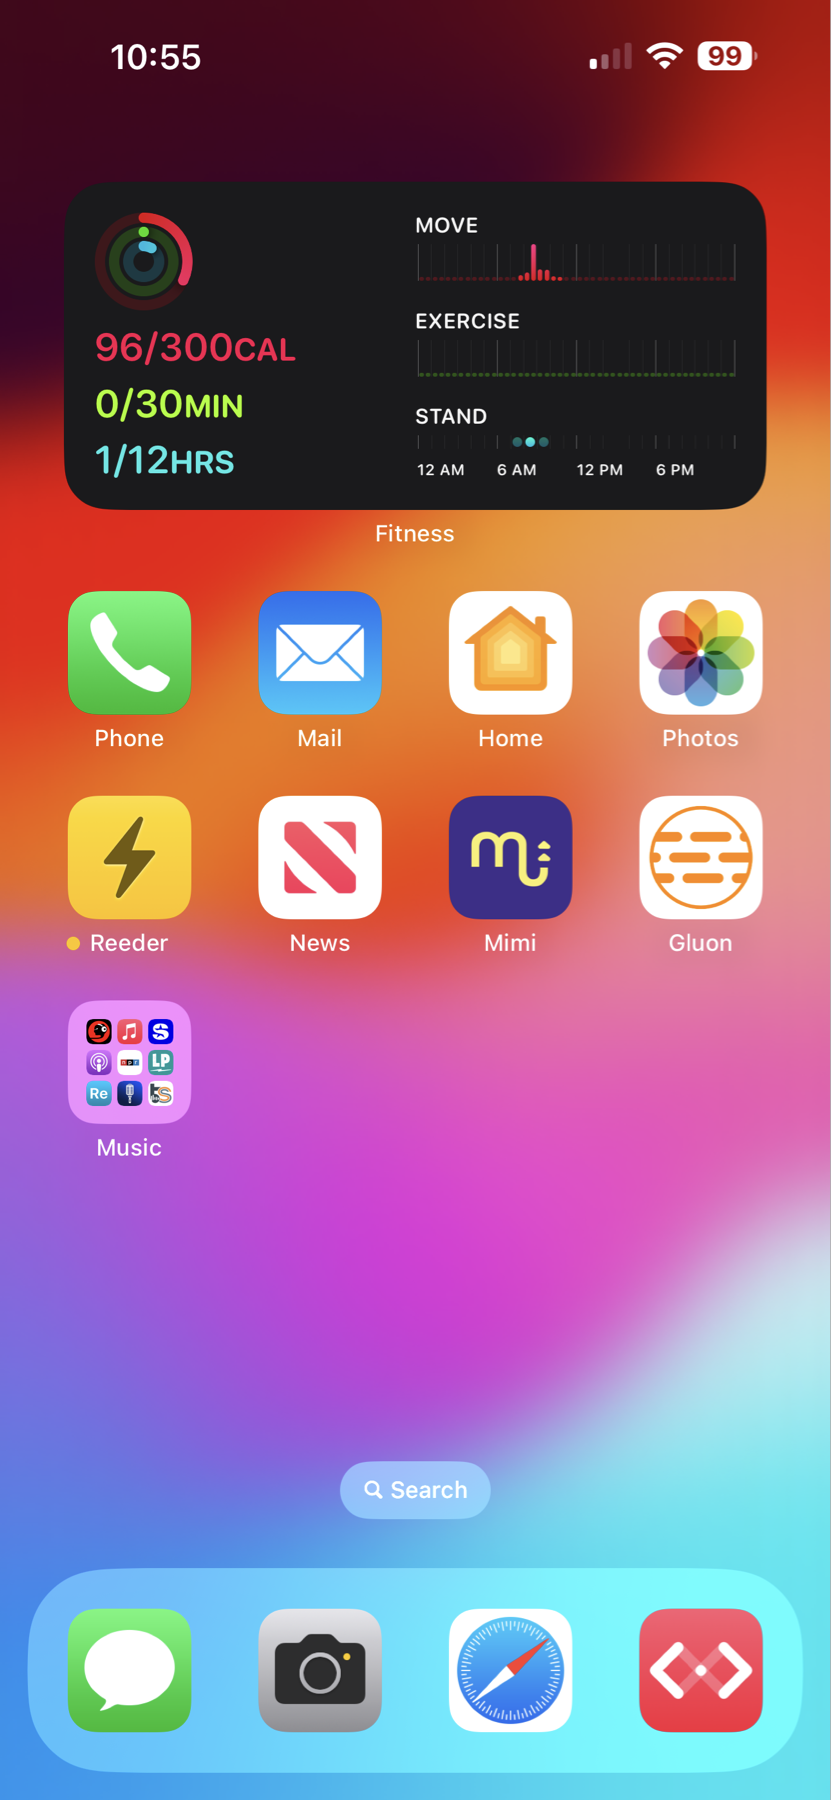 The image shows a smartphone home screen with a bright gradient background. At the top, the time is 10:55 and the battery is 99%. There is a fitness widget displaying activity stats: Move (96/300 CAL), Exercise (0